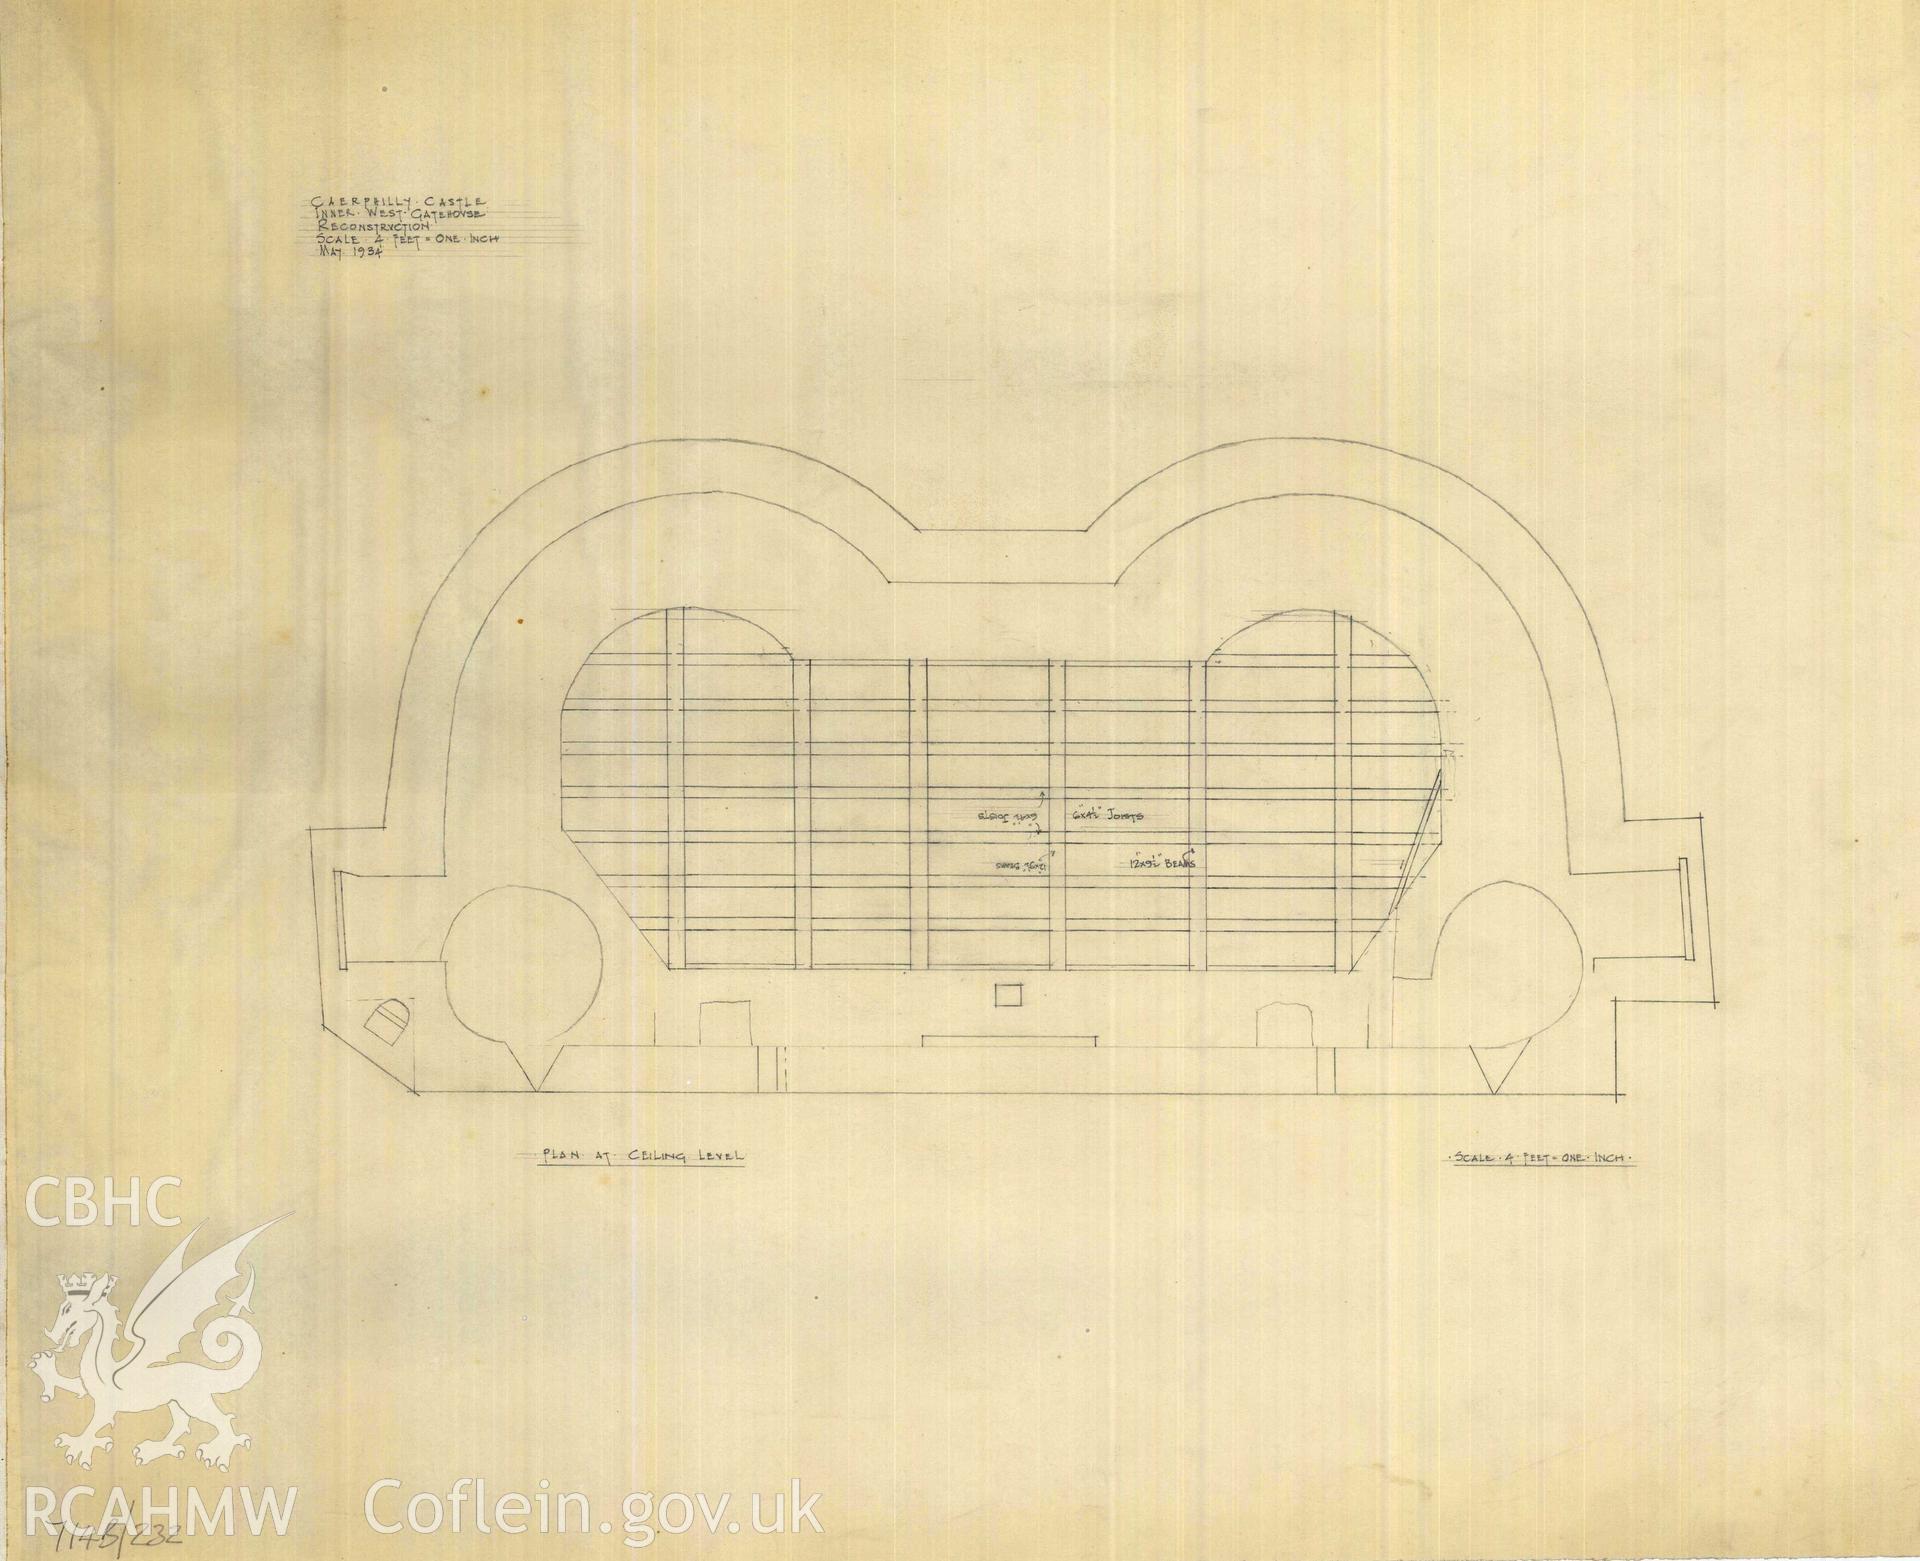 Cadw guardianship monument drawing of Caerphilly Castle. Inner W gate, upper floor joists. Cadw Ref. No:714B/232. Scale 1:48.